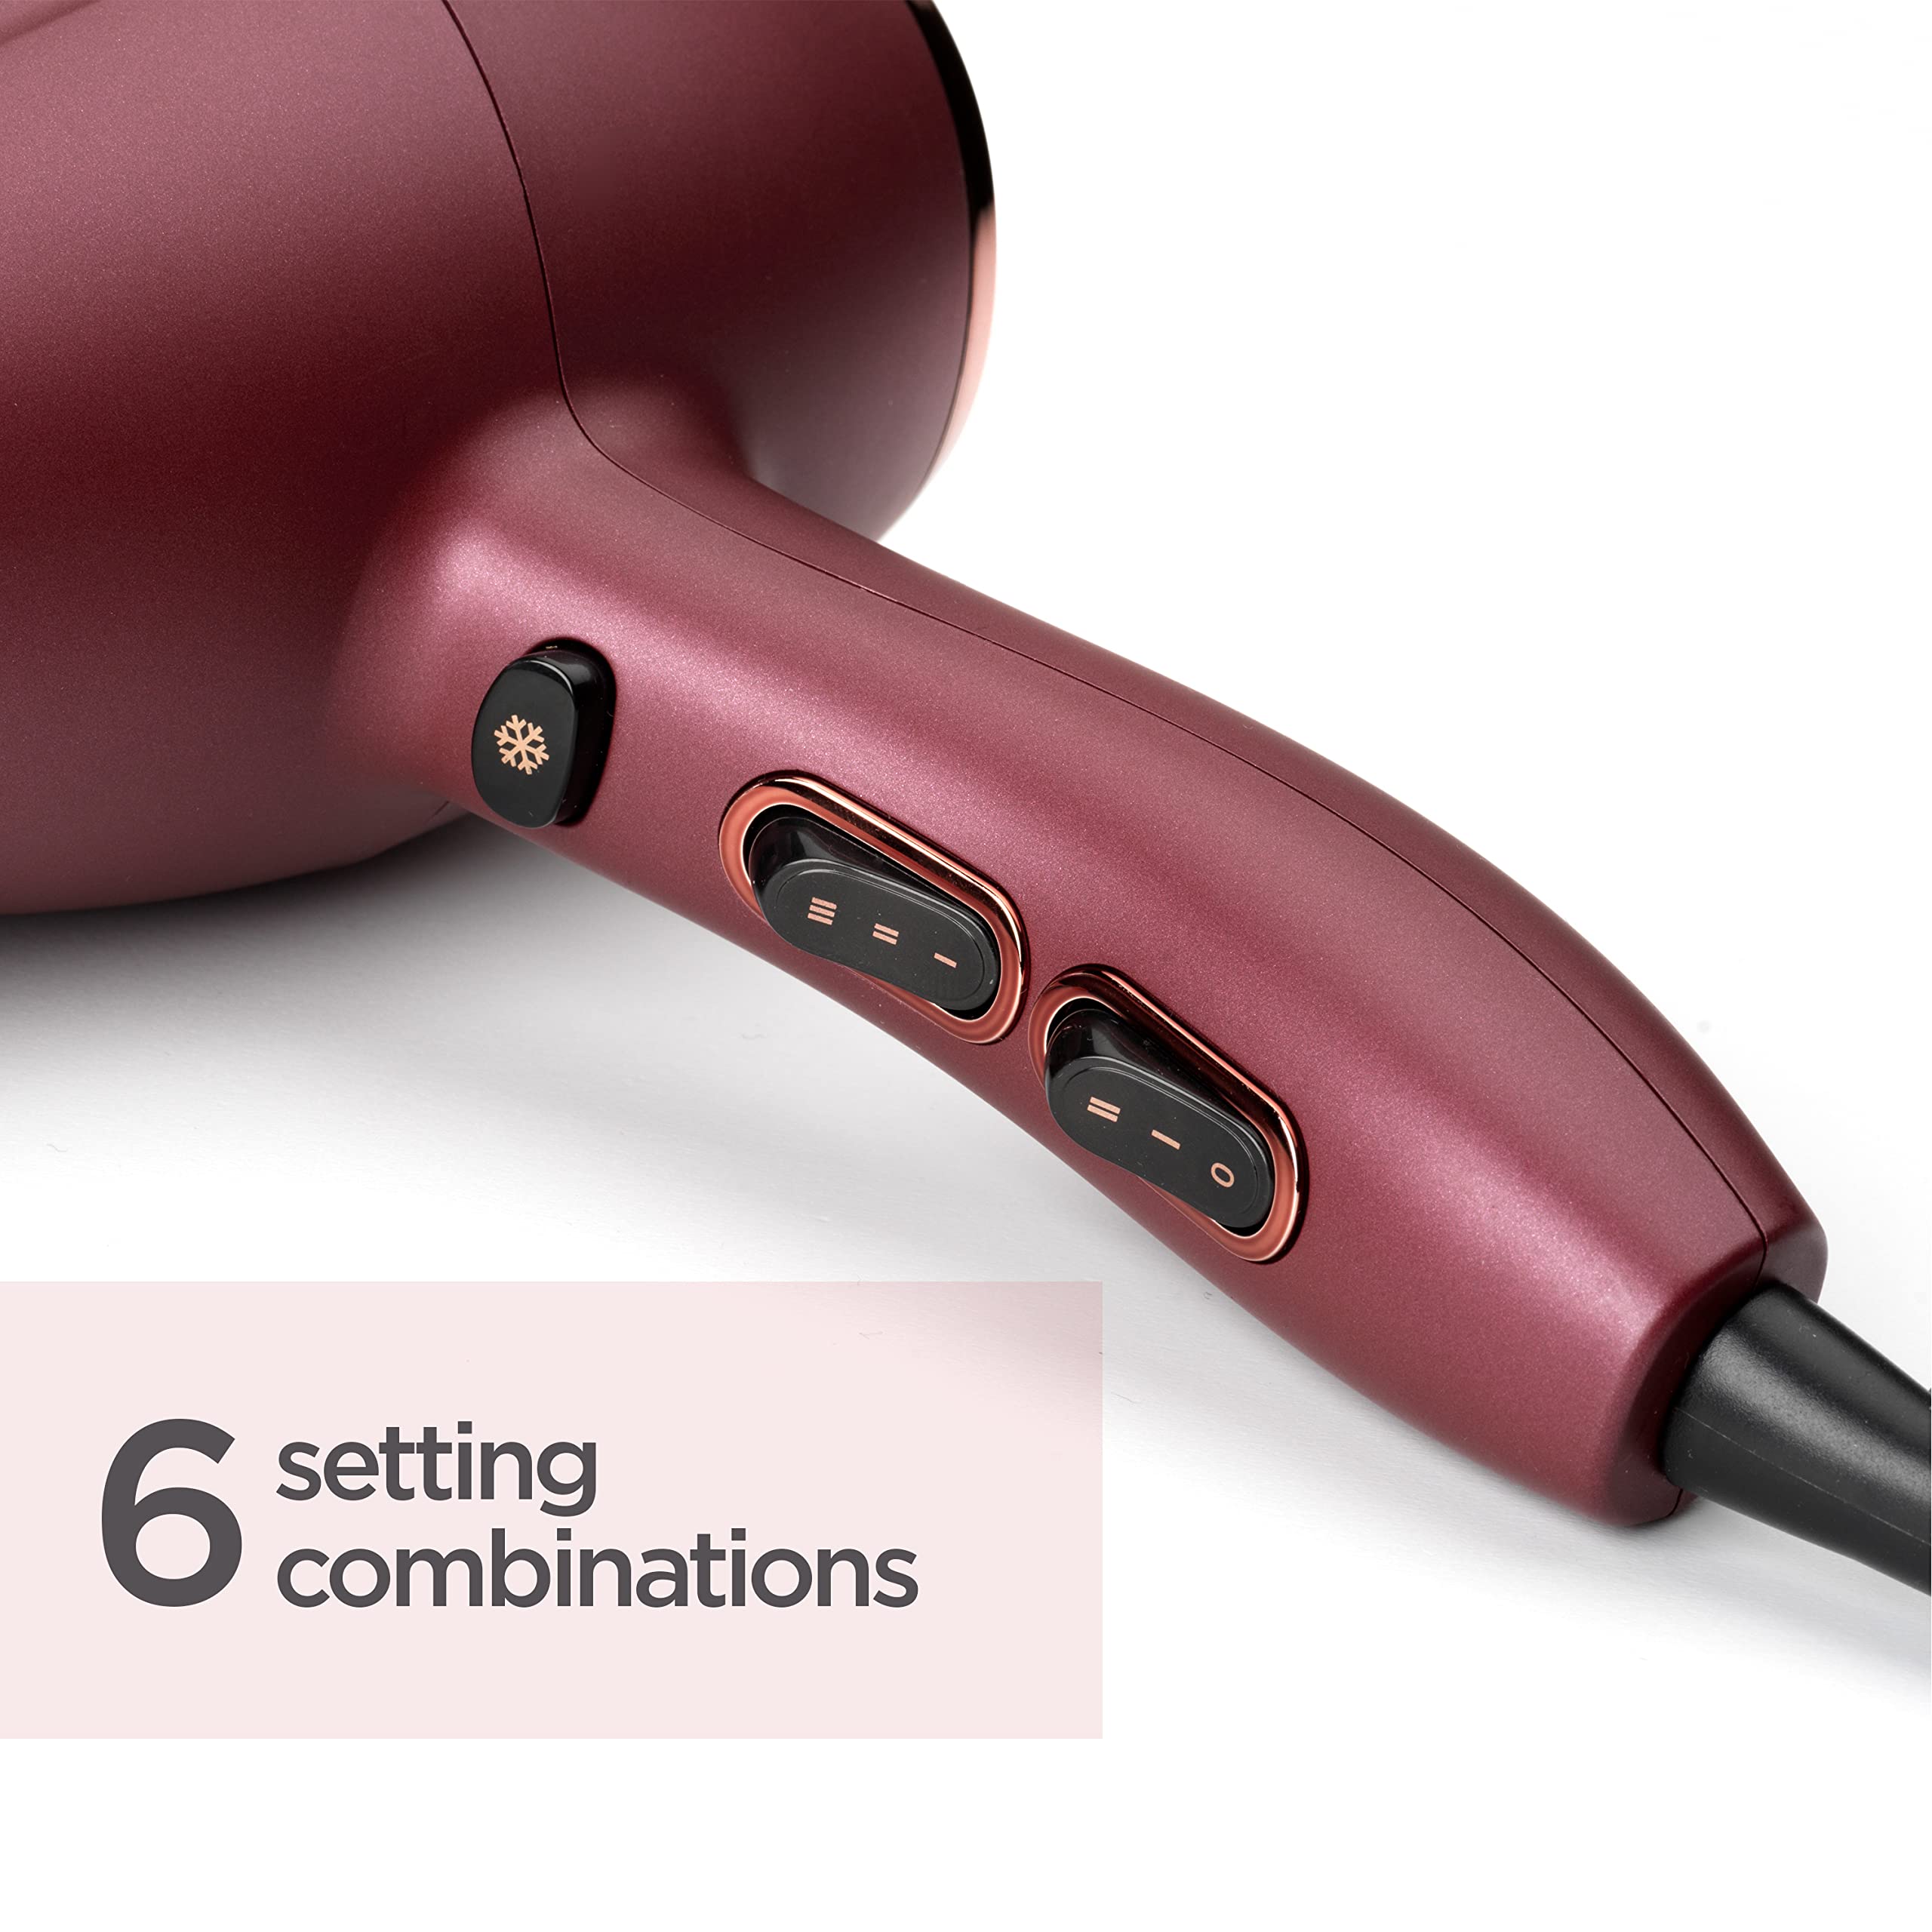 BaByliss Berry Crush Dryer | Advanced Airflow Technology Gives A Powerful, Controlled Airstream| 3 Heats And 2 Speed Settings For Controlled Drying And Styling|lightweight | 5753PSDE(Burgundy)